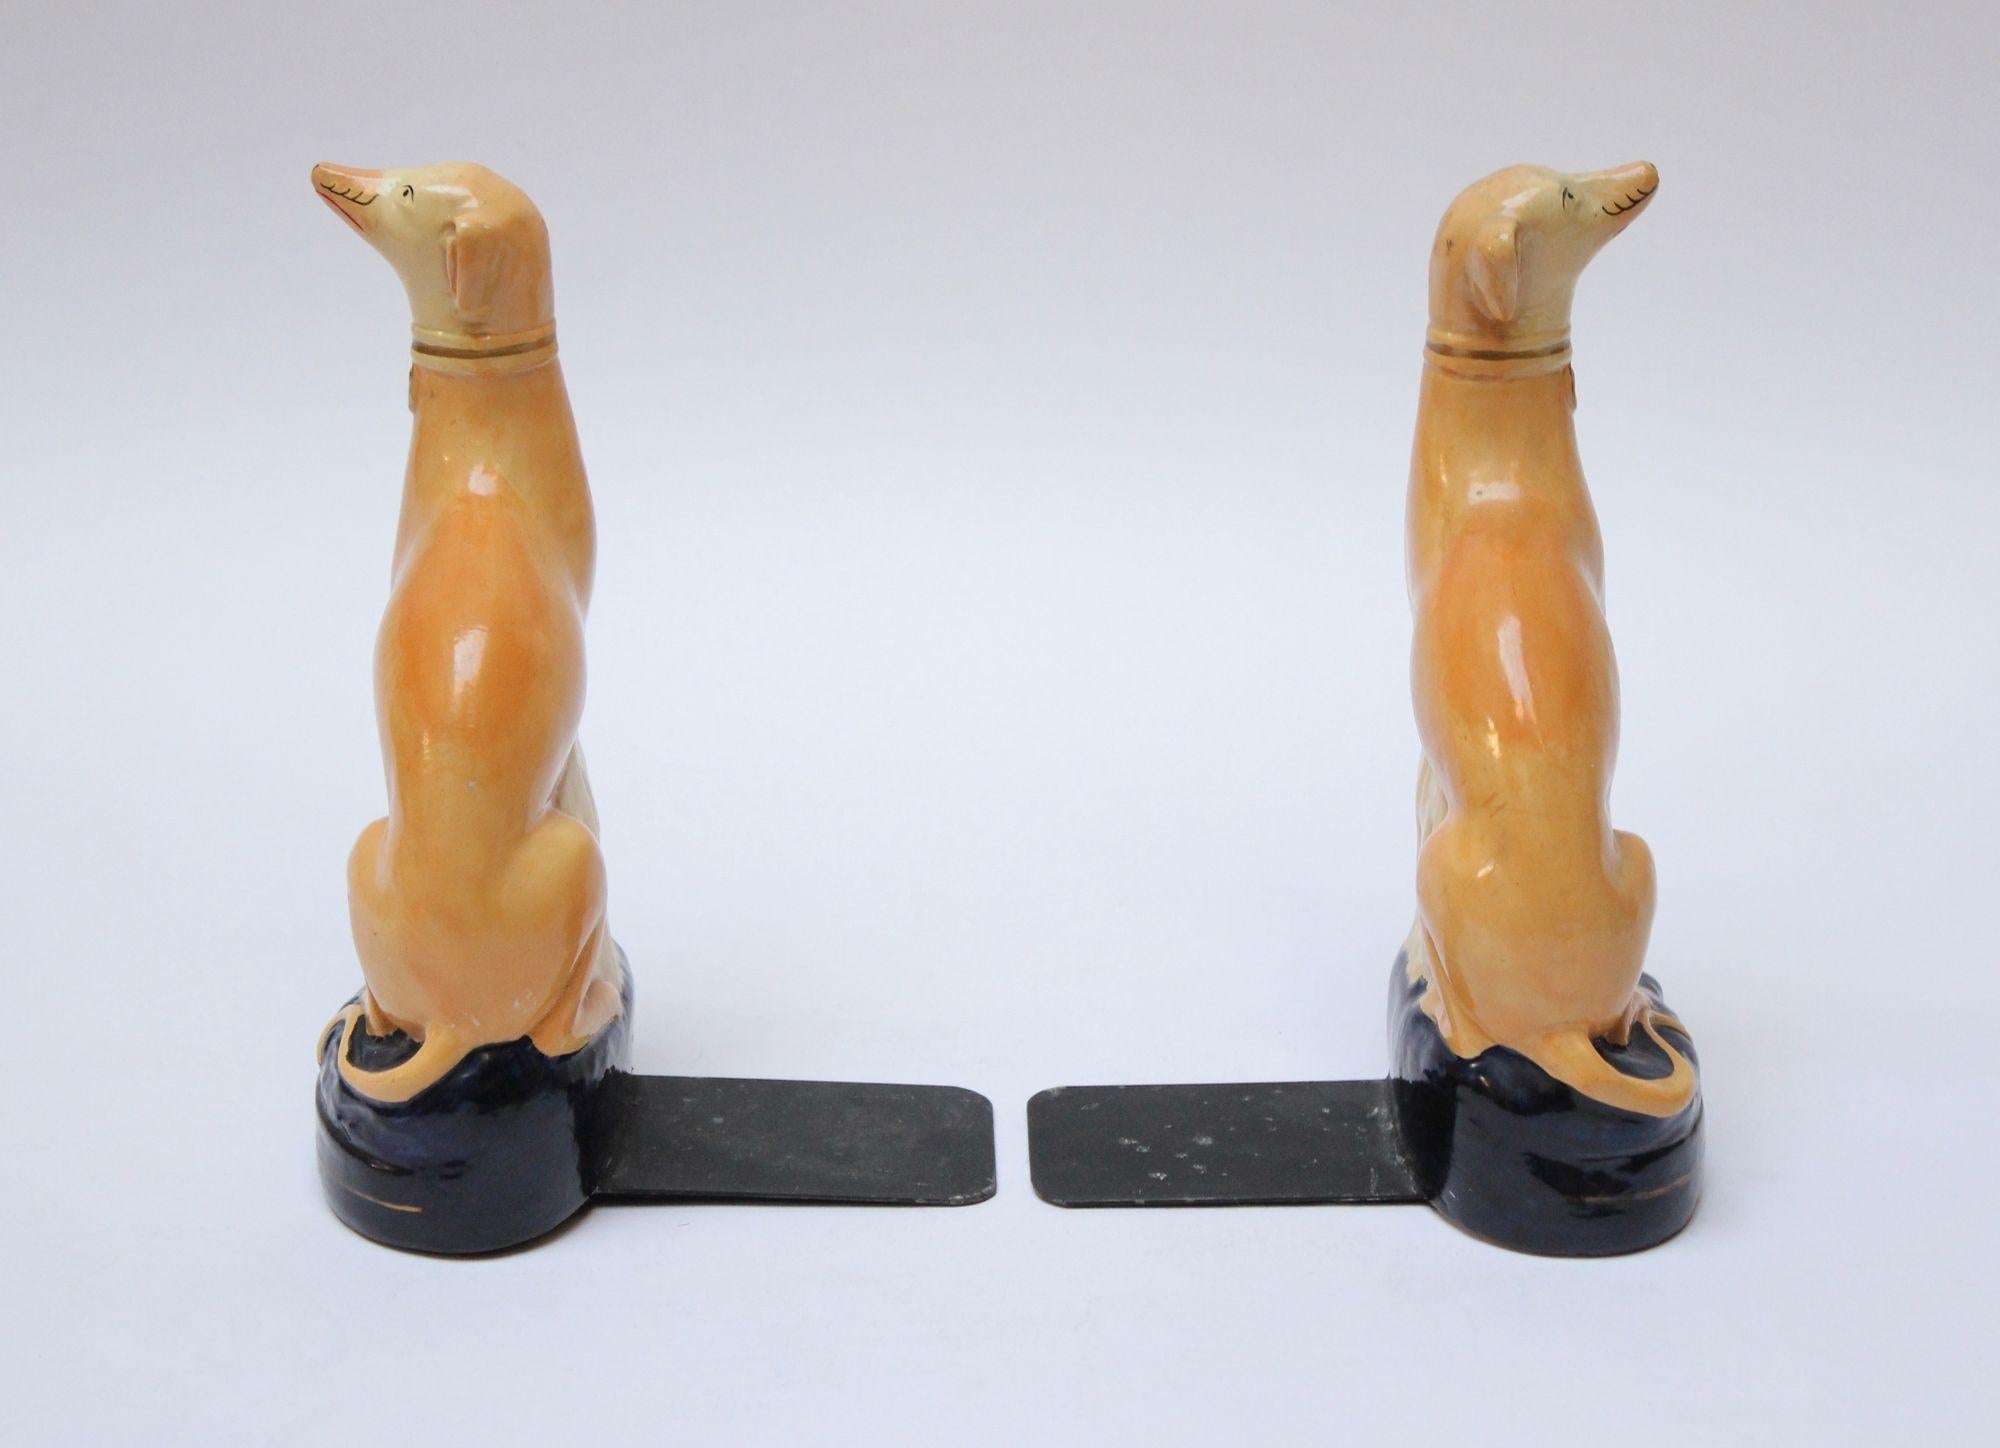 Hand-Painted Pair of Vintage Italian Figural Porcelain Italian Greyhound Bookends by Borghese